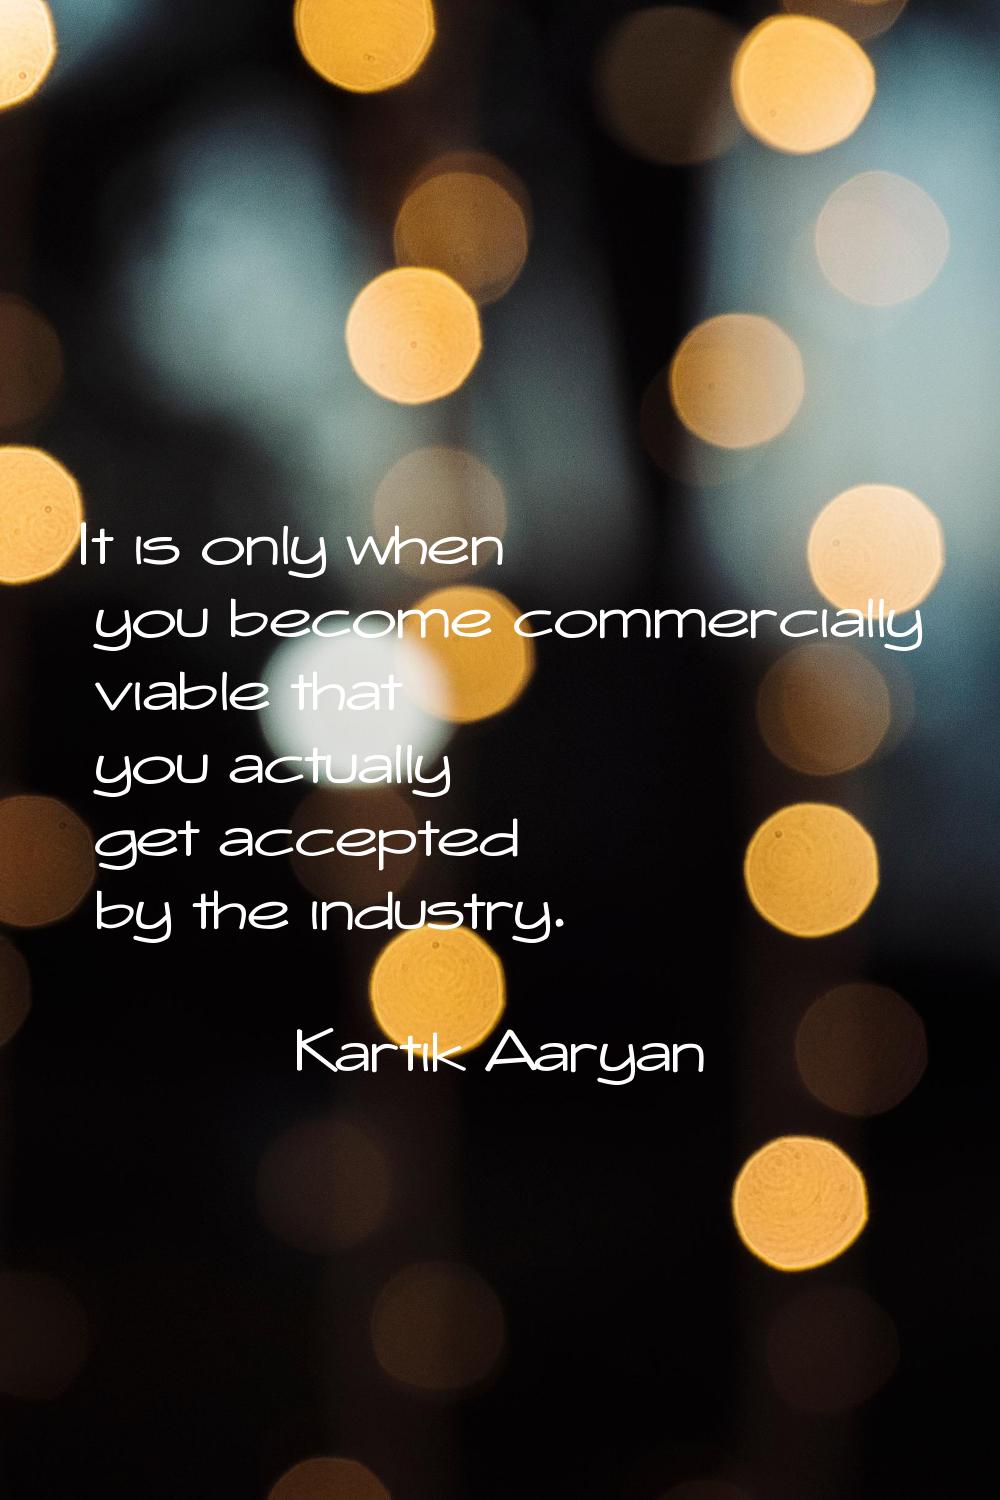 It is only when you become commercially viable that you actually get accepted by the industry.